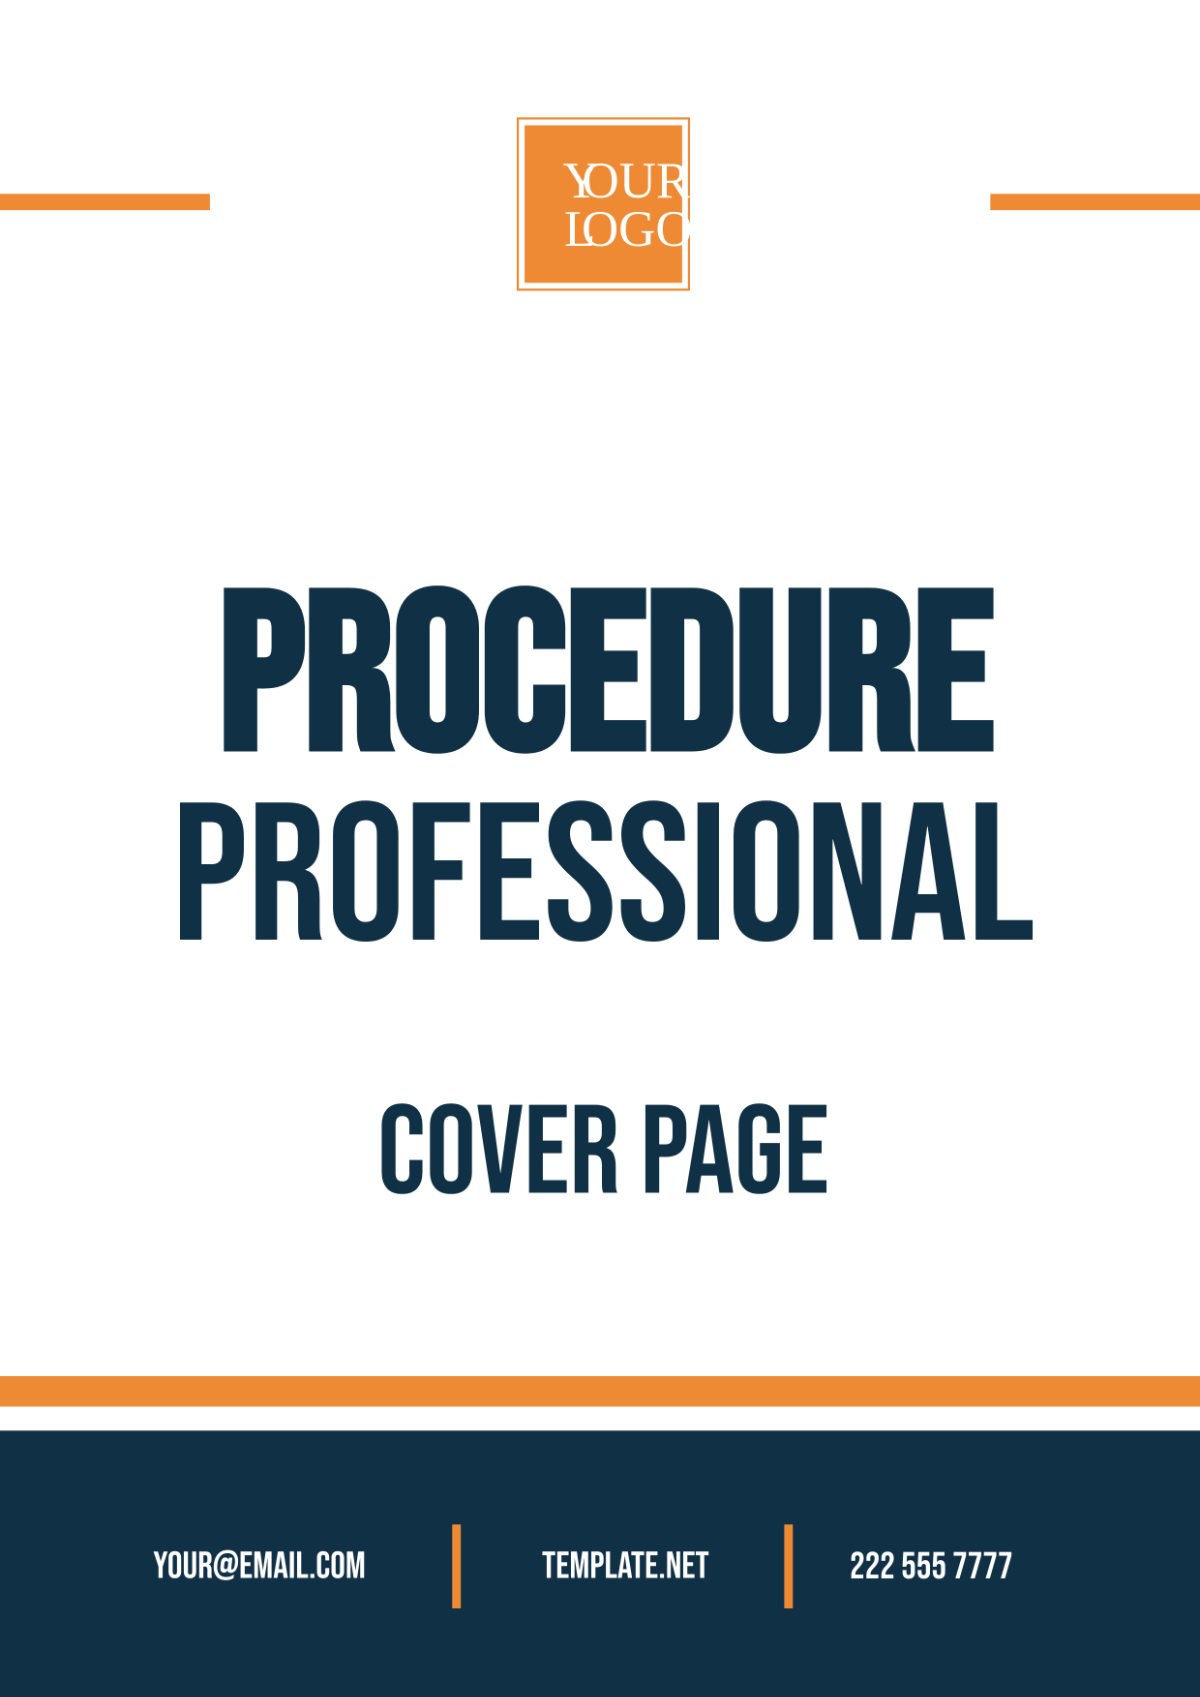 Free Procedure Professional Cover Page Template